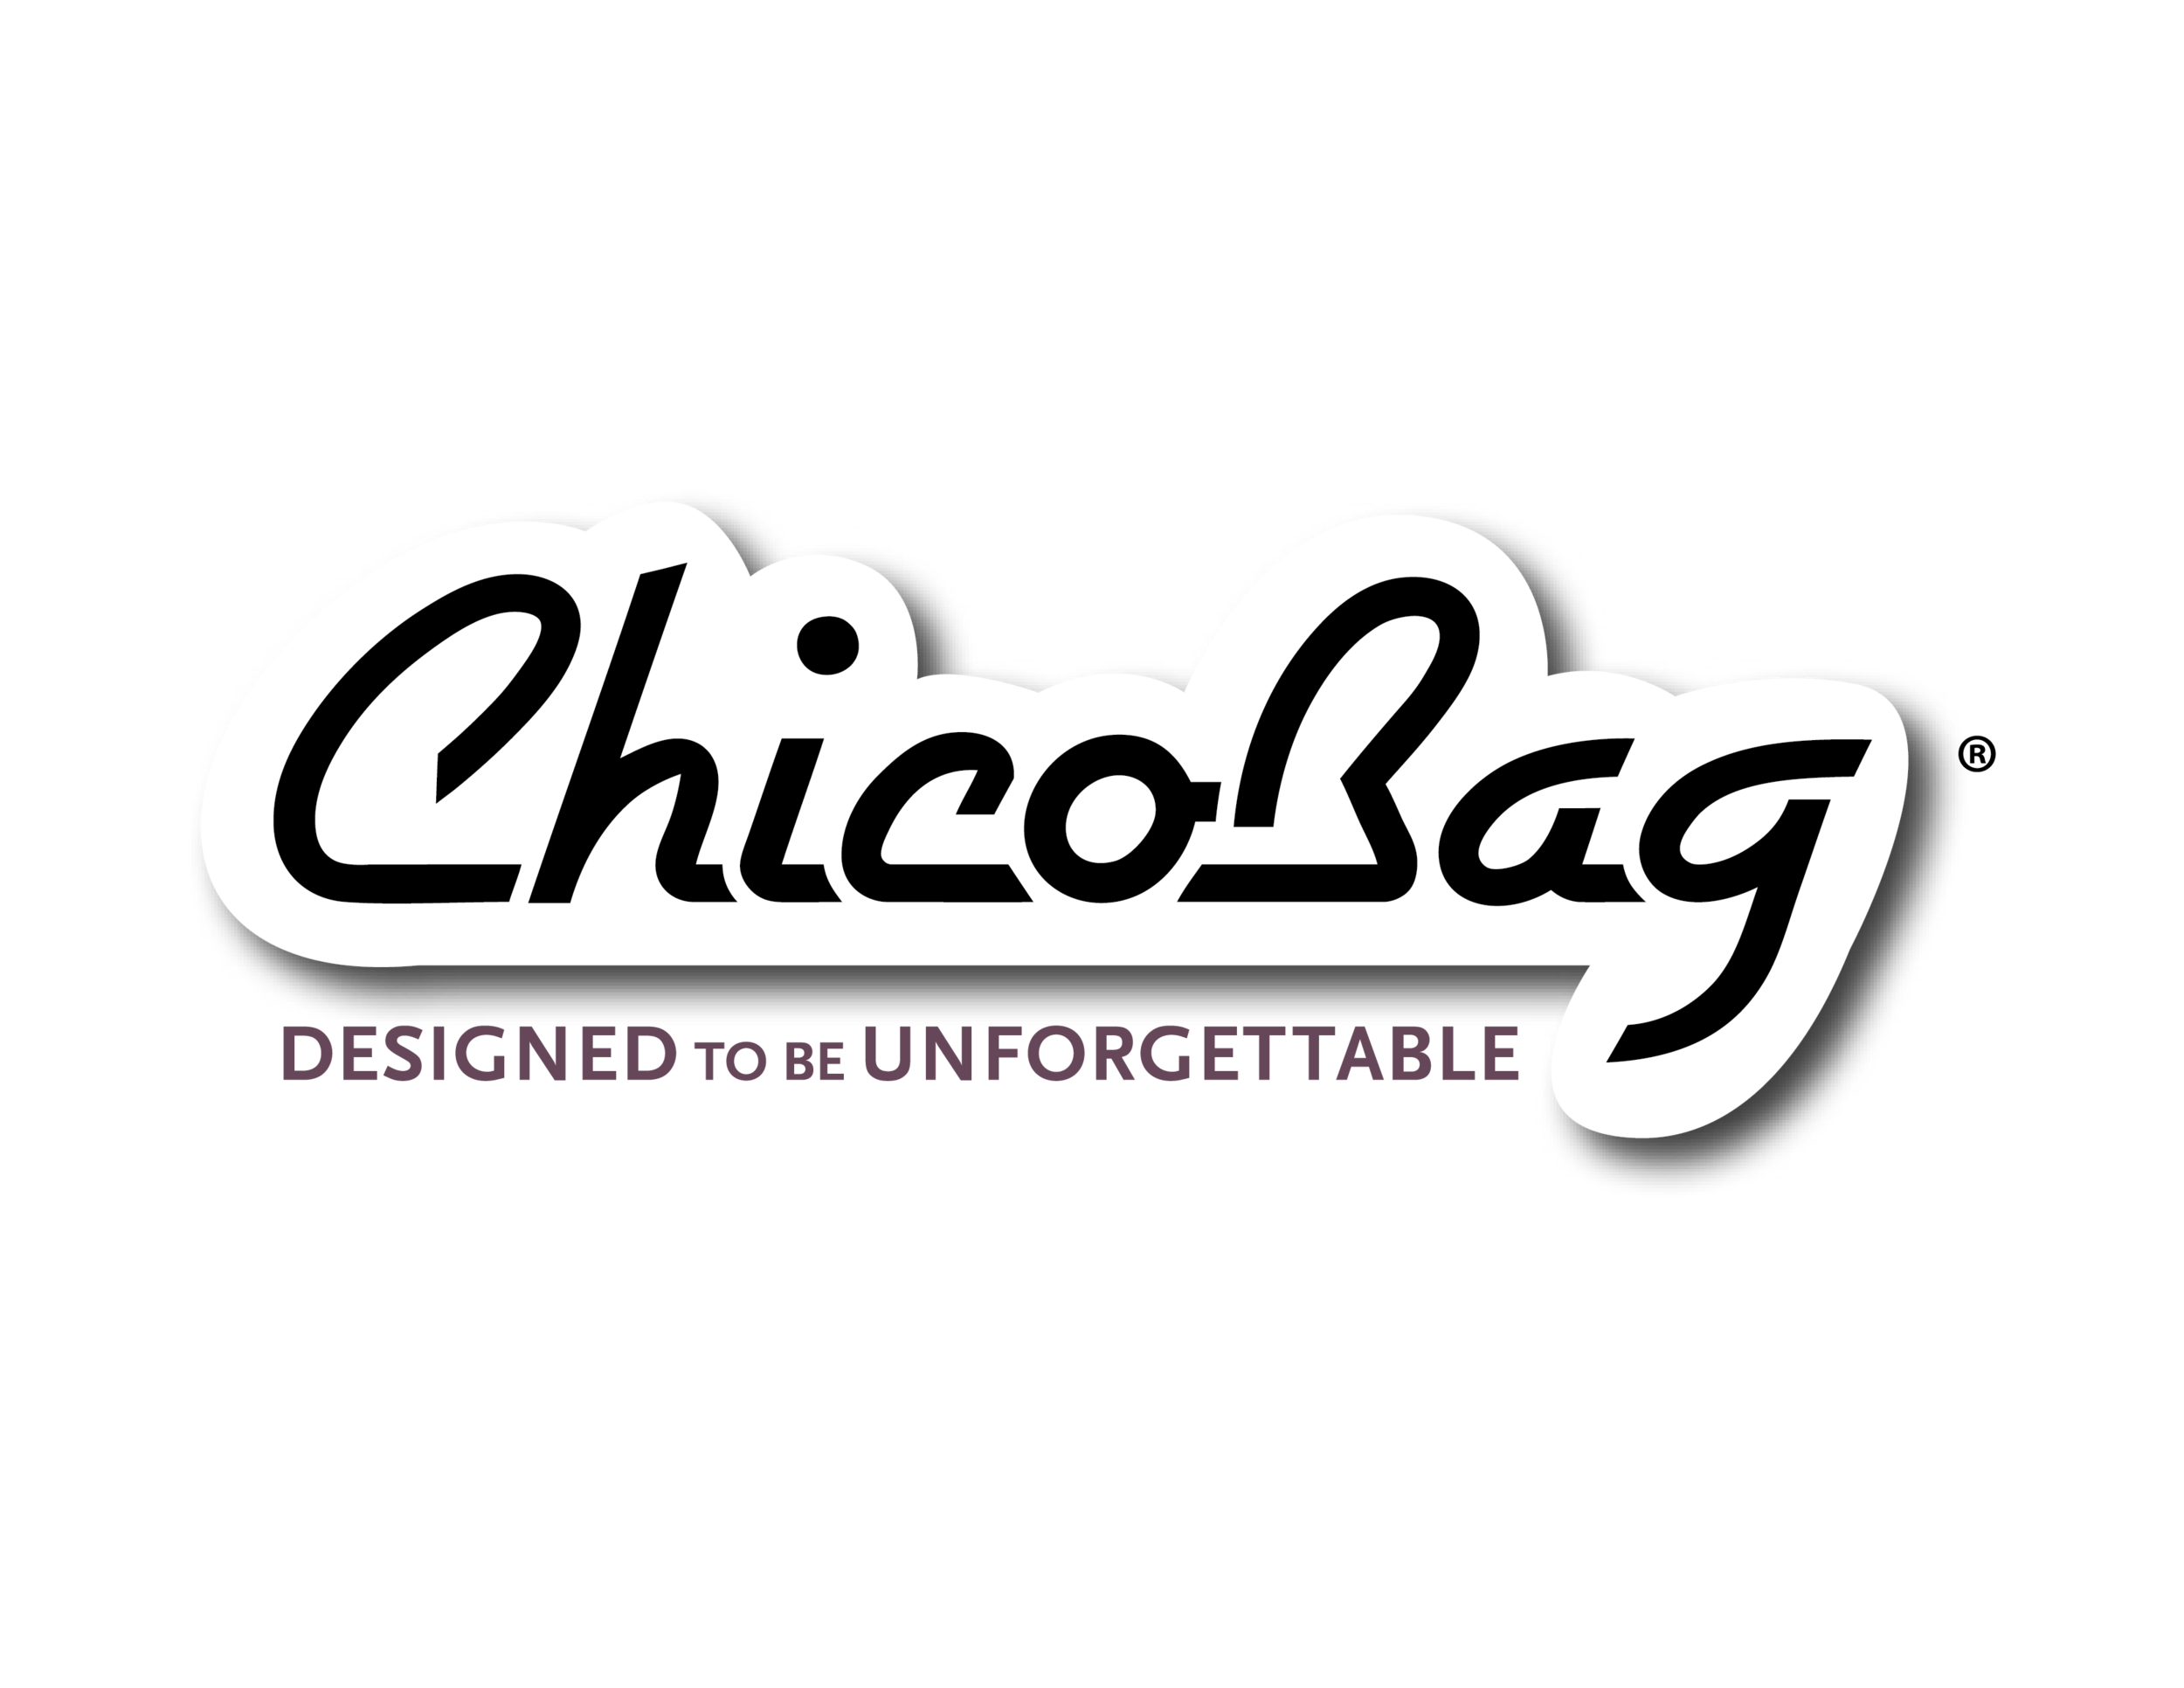 Set of 3 reusable sandwich bags from <i>Chico Bags</i>